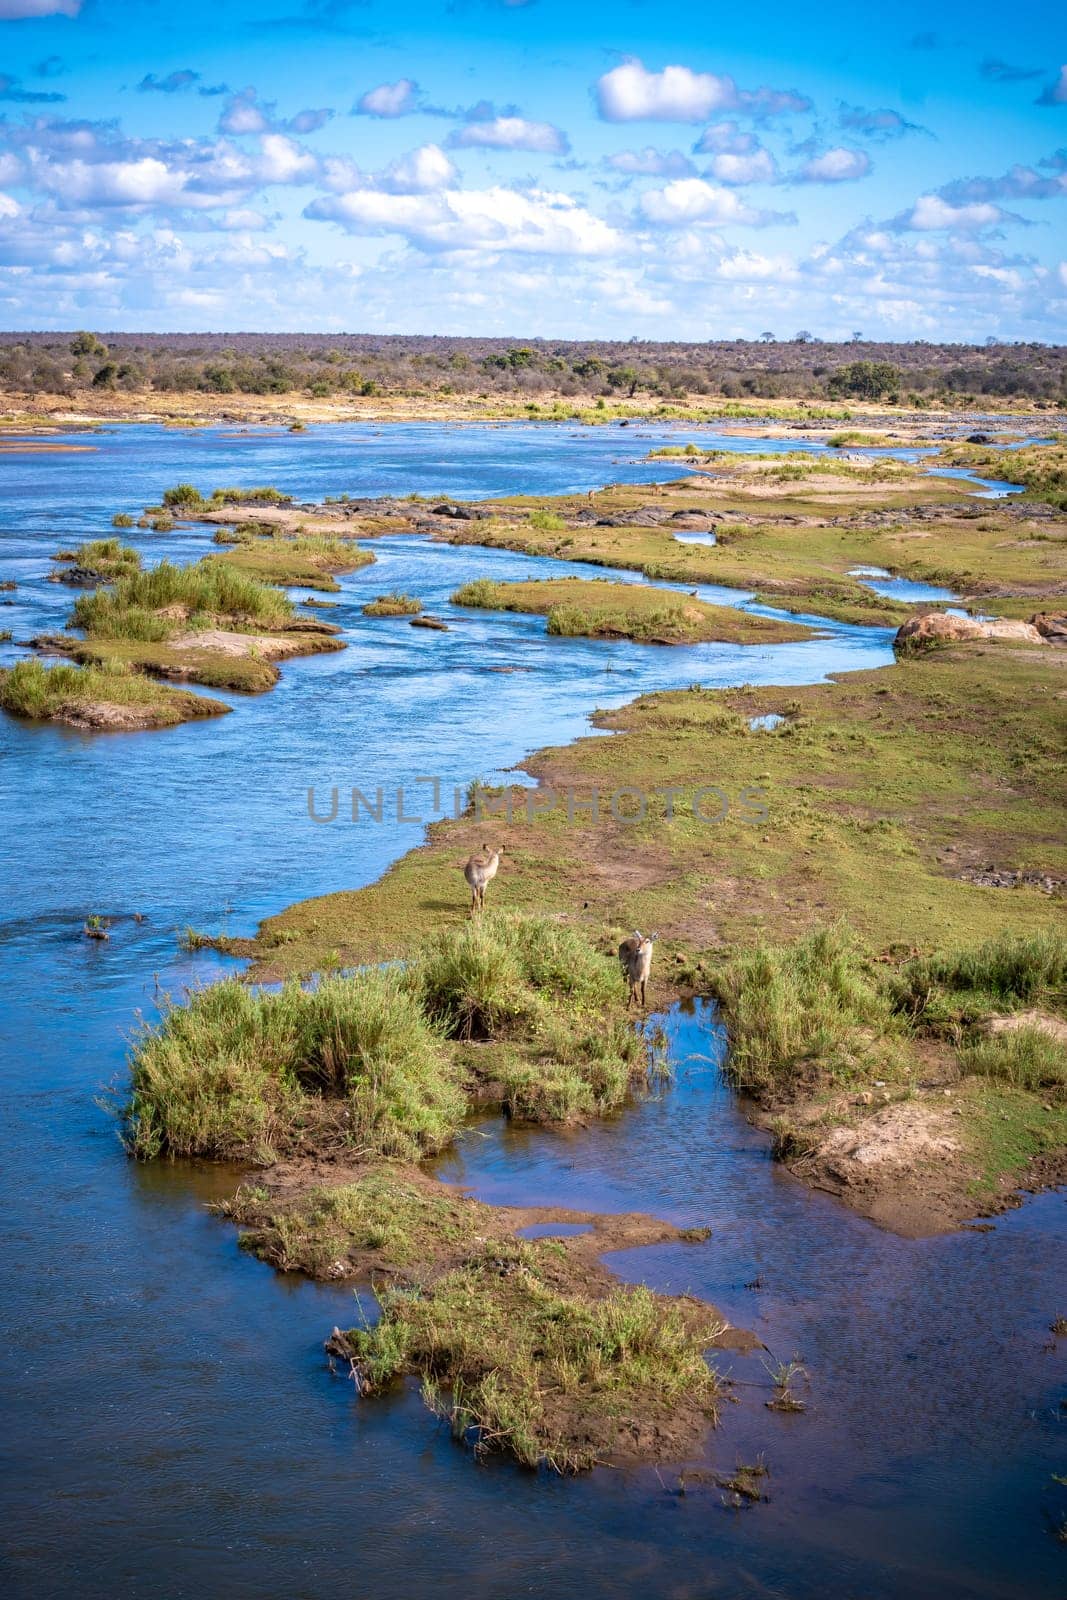 Savannah river in Kruger National Park, South Africa. High quality photo